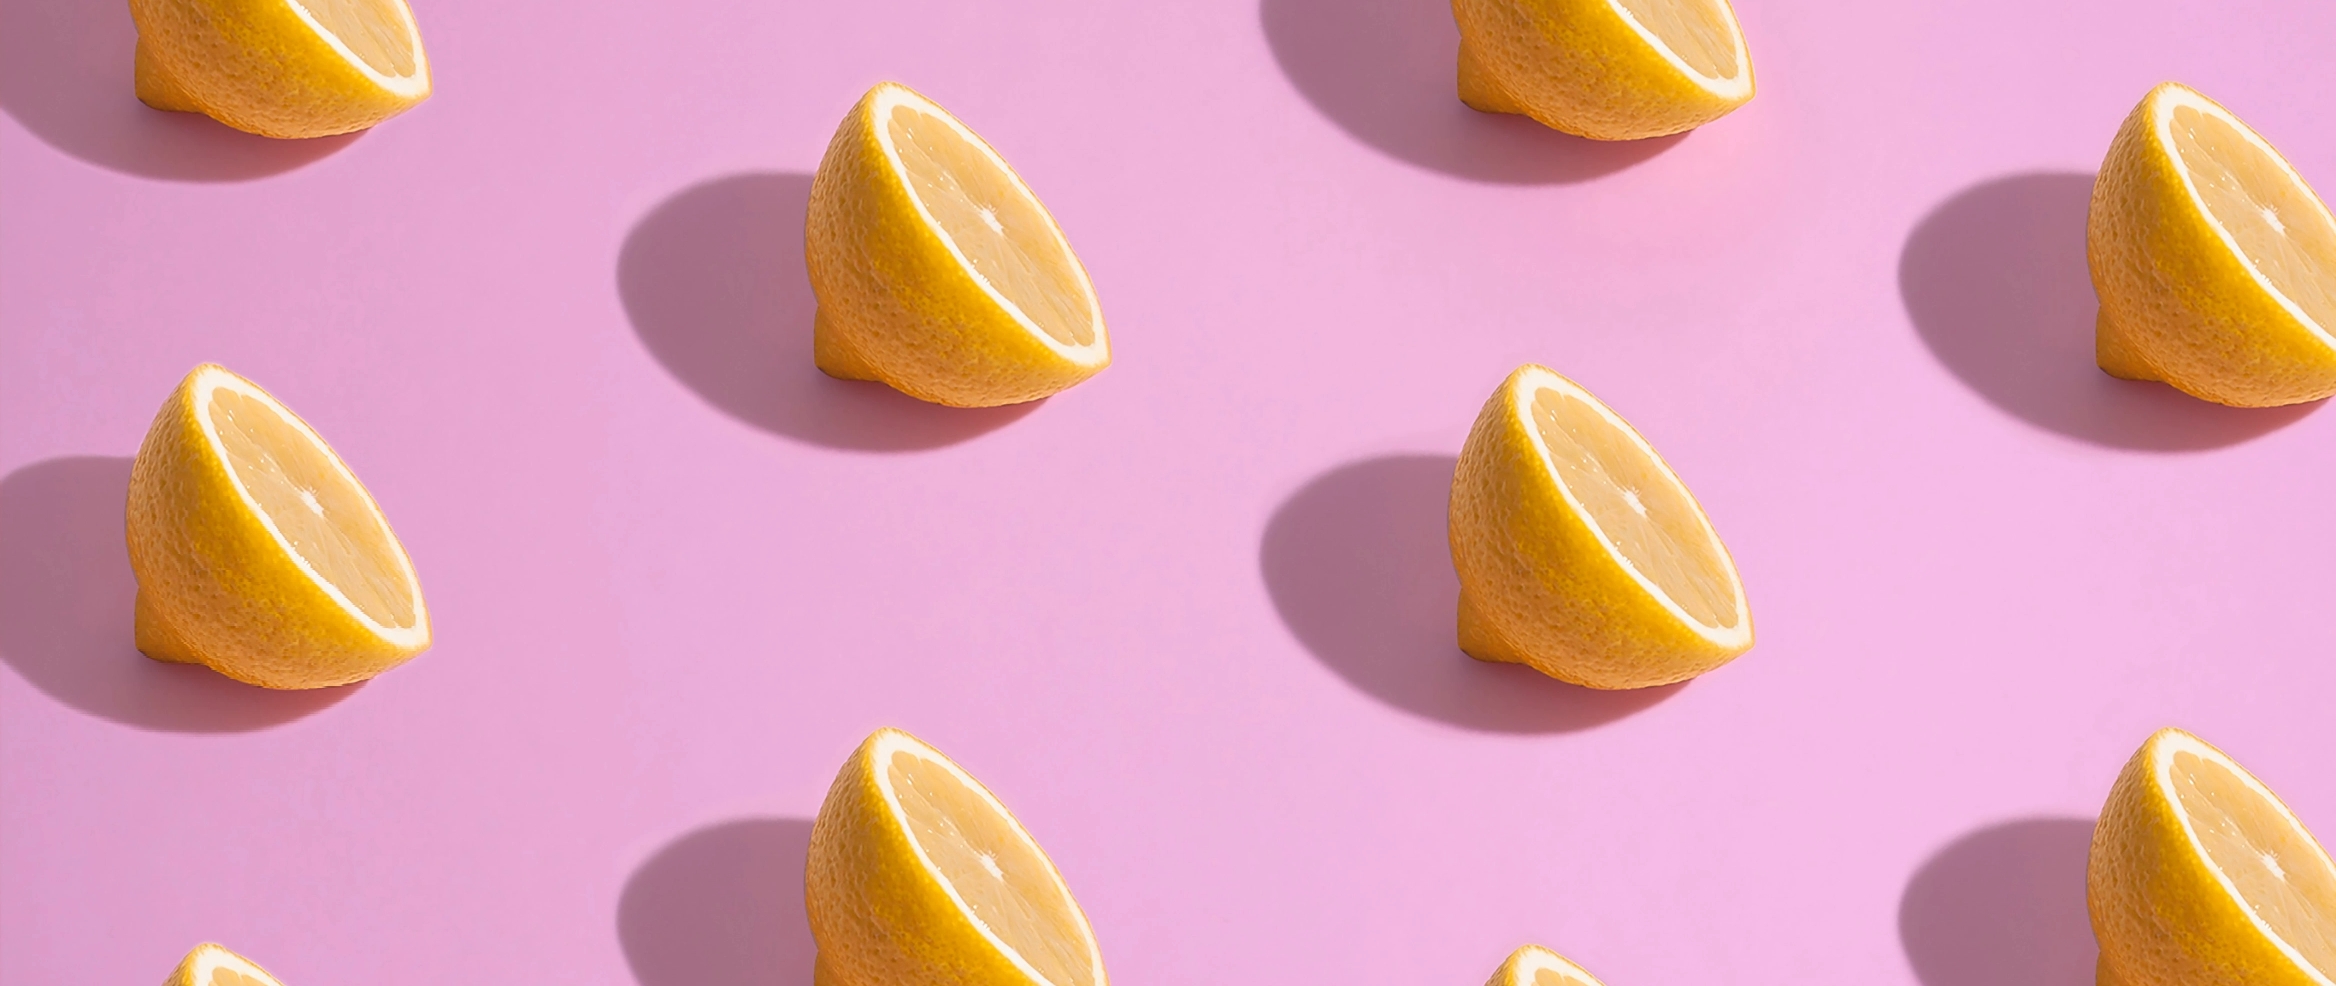 12 Fresh Ways to Clean With Lemons